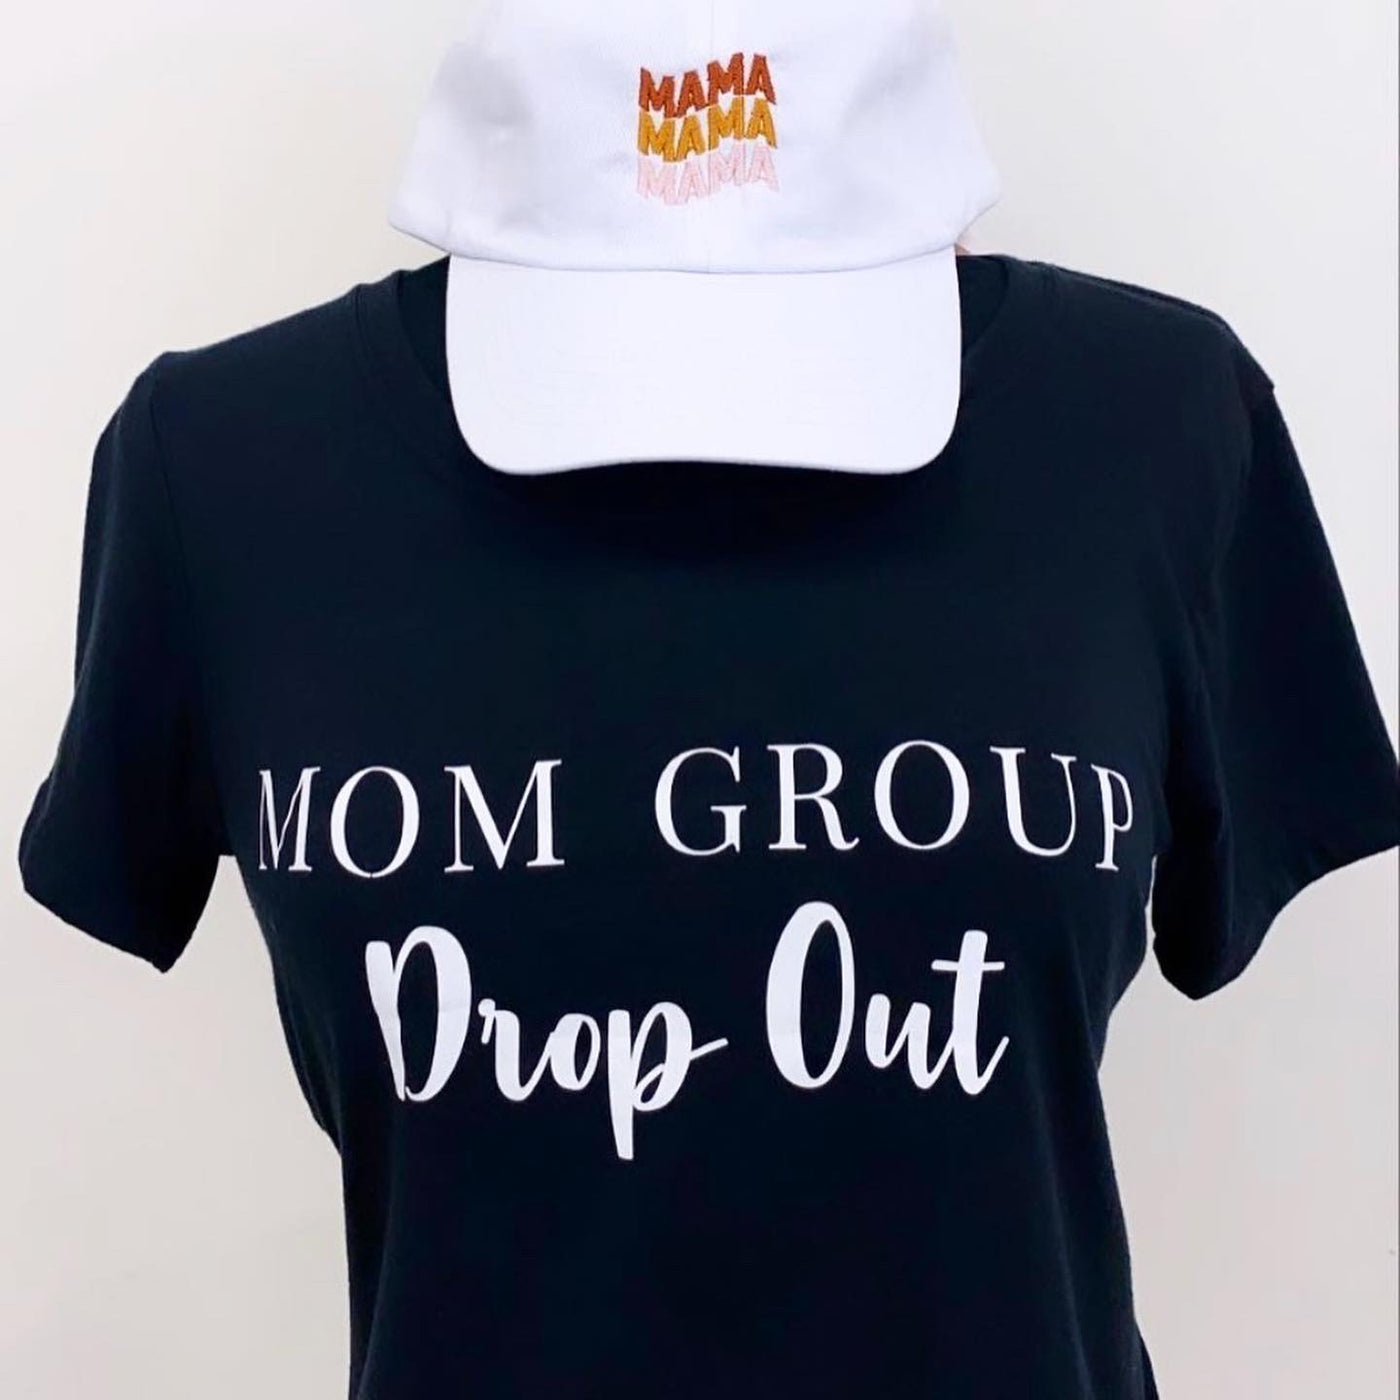 "Mom Group Drop Out" T-Shirt